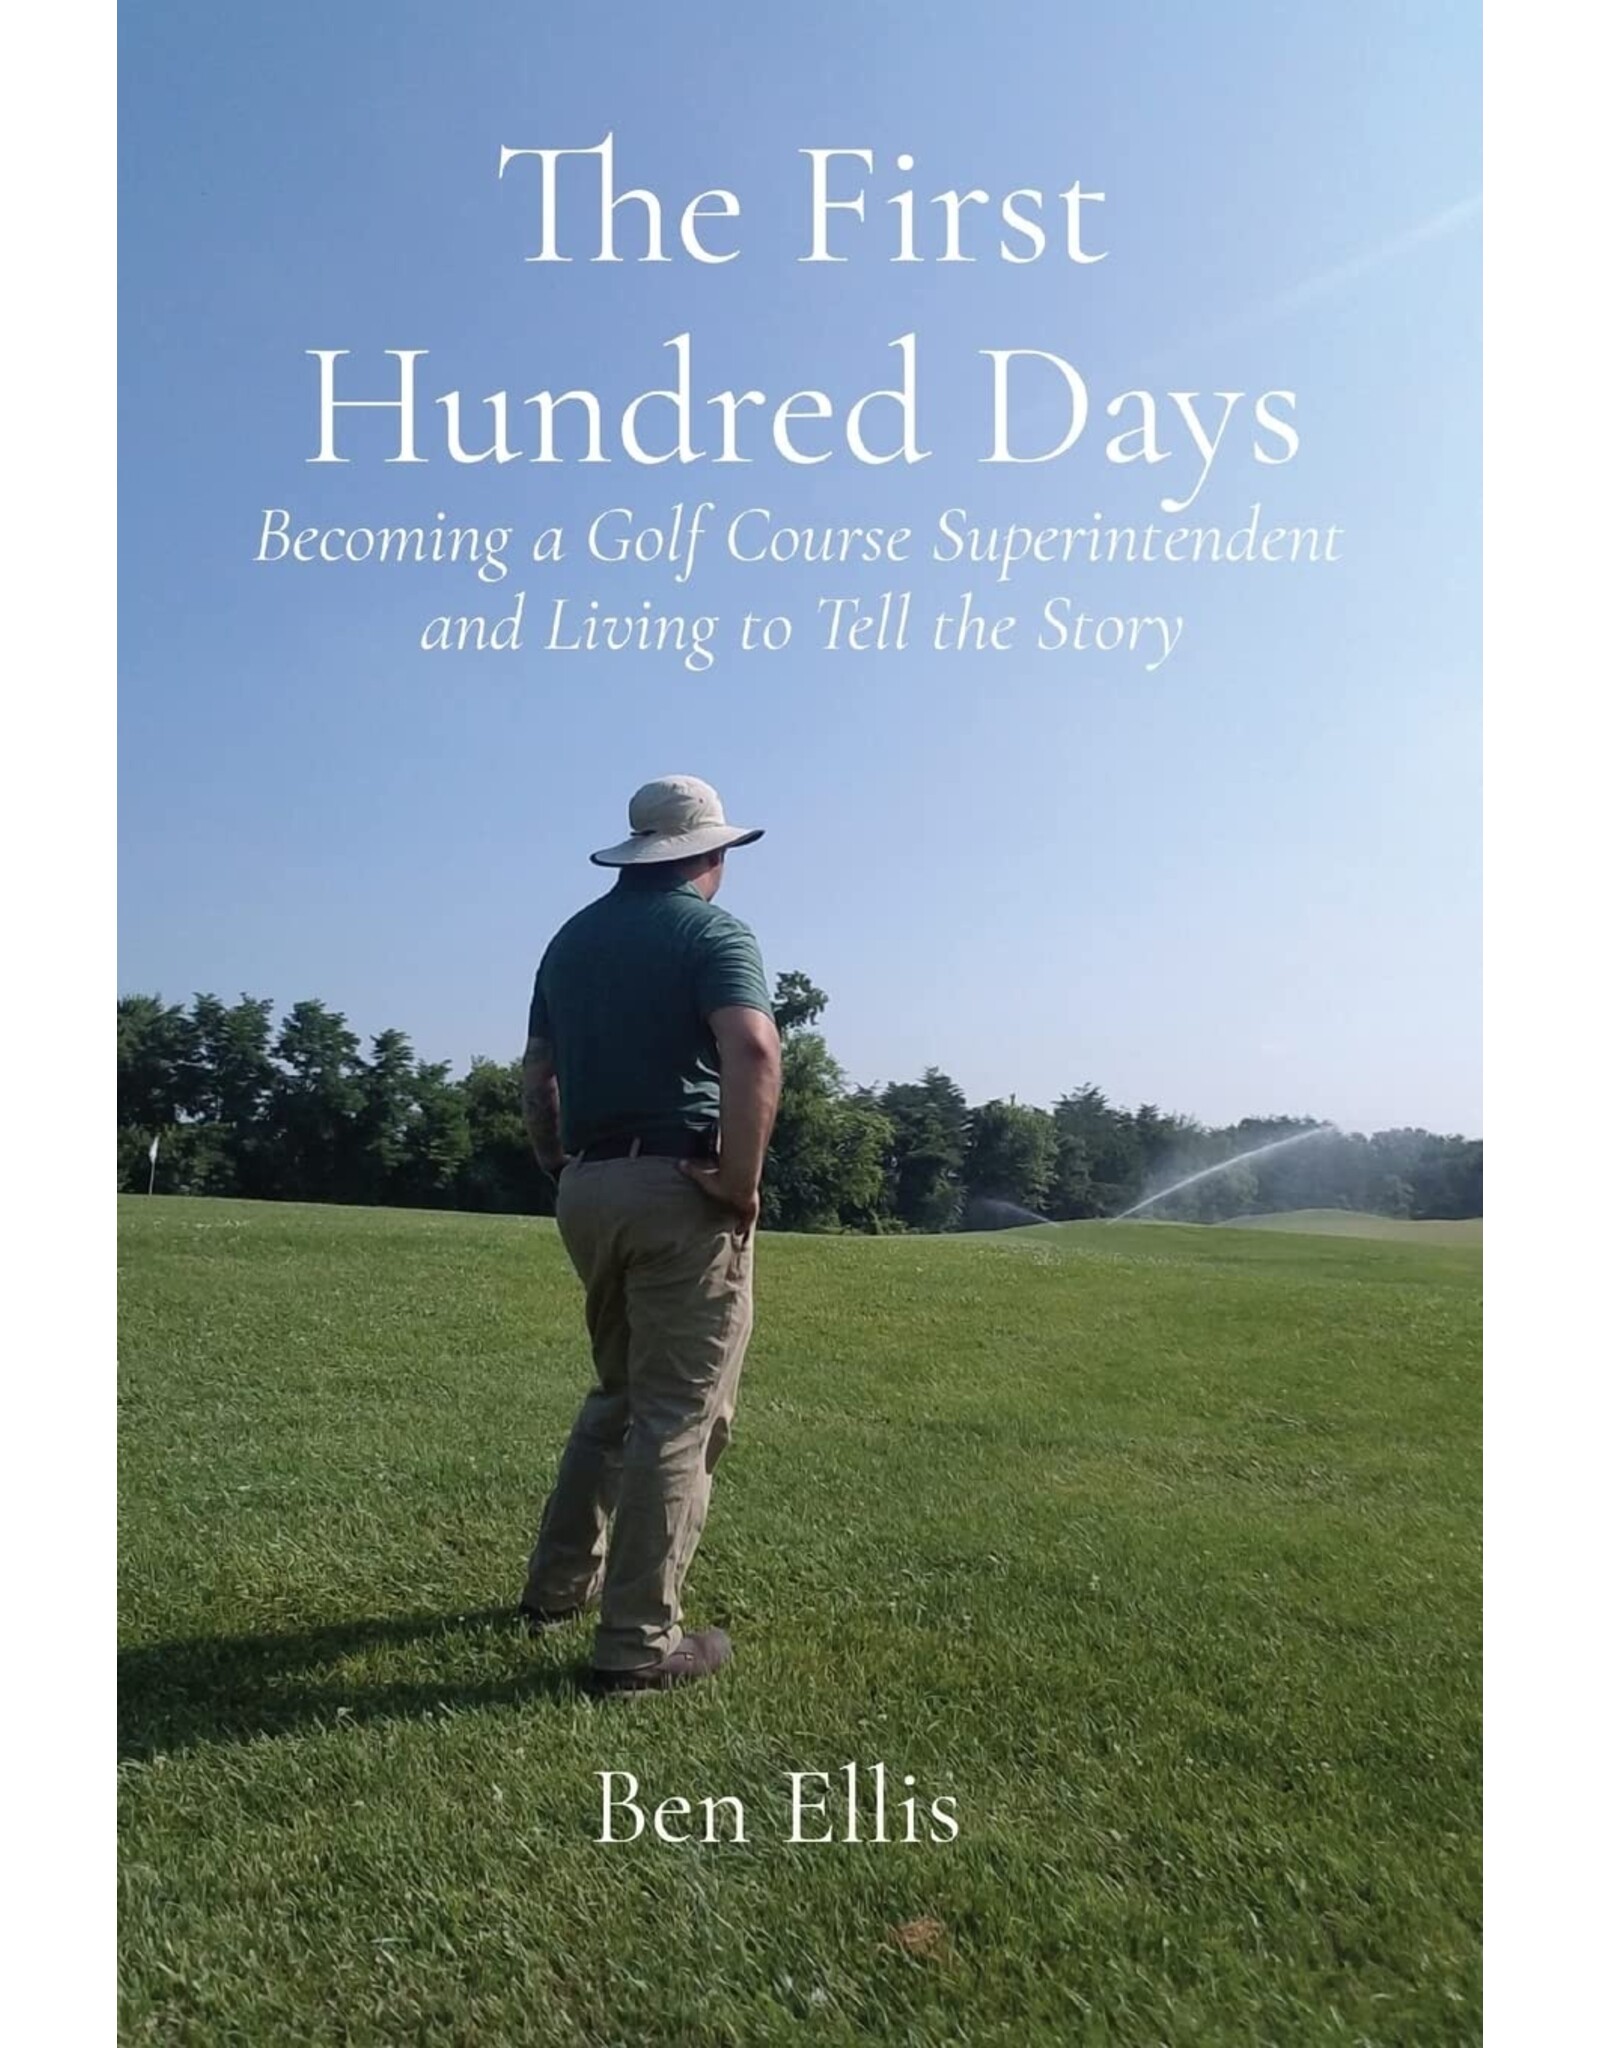 The First 100 Days, Becoming a GC Superintendent